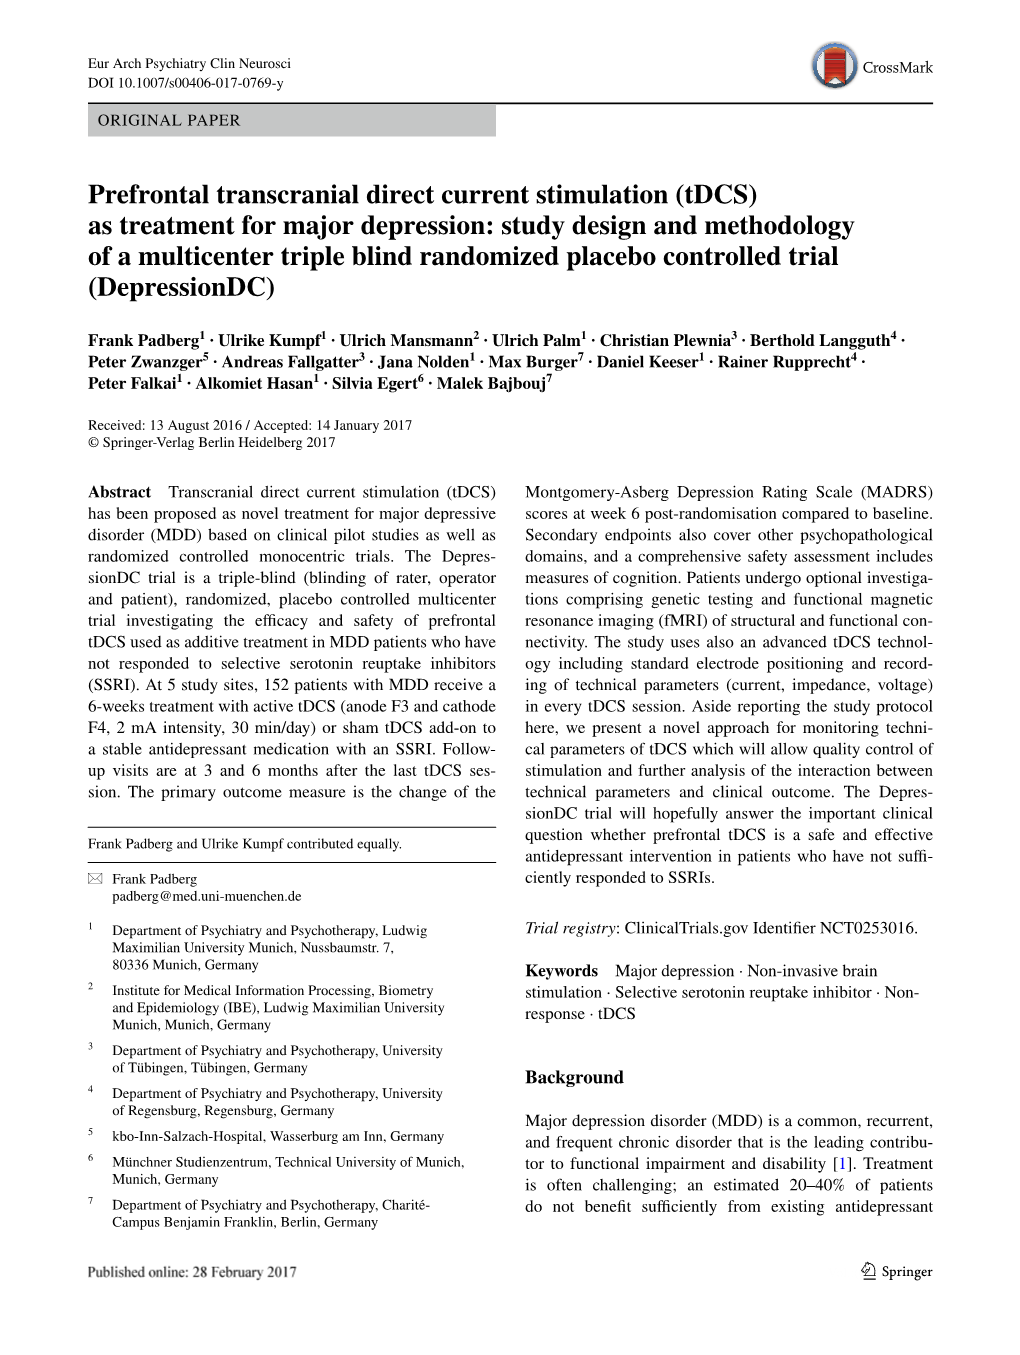 Prefrontal Transcranial Direct Current Stimulation (Tdcs) As Treatment for Major Depression: Study Design and Methodology Of